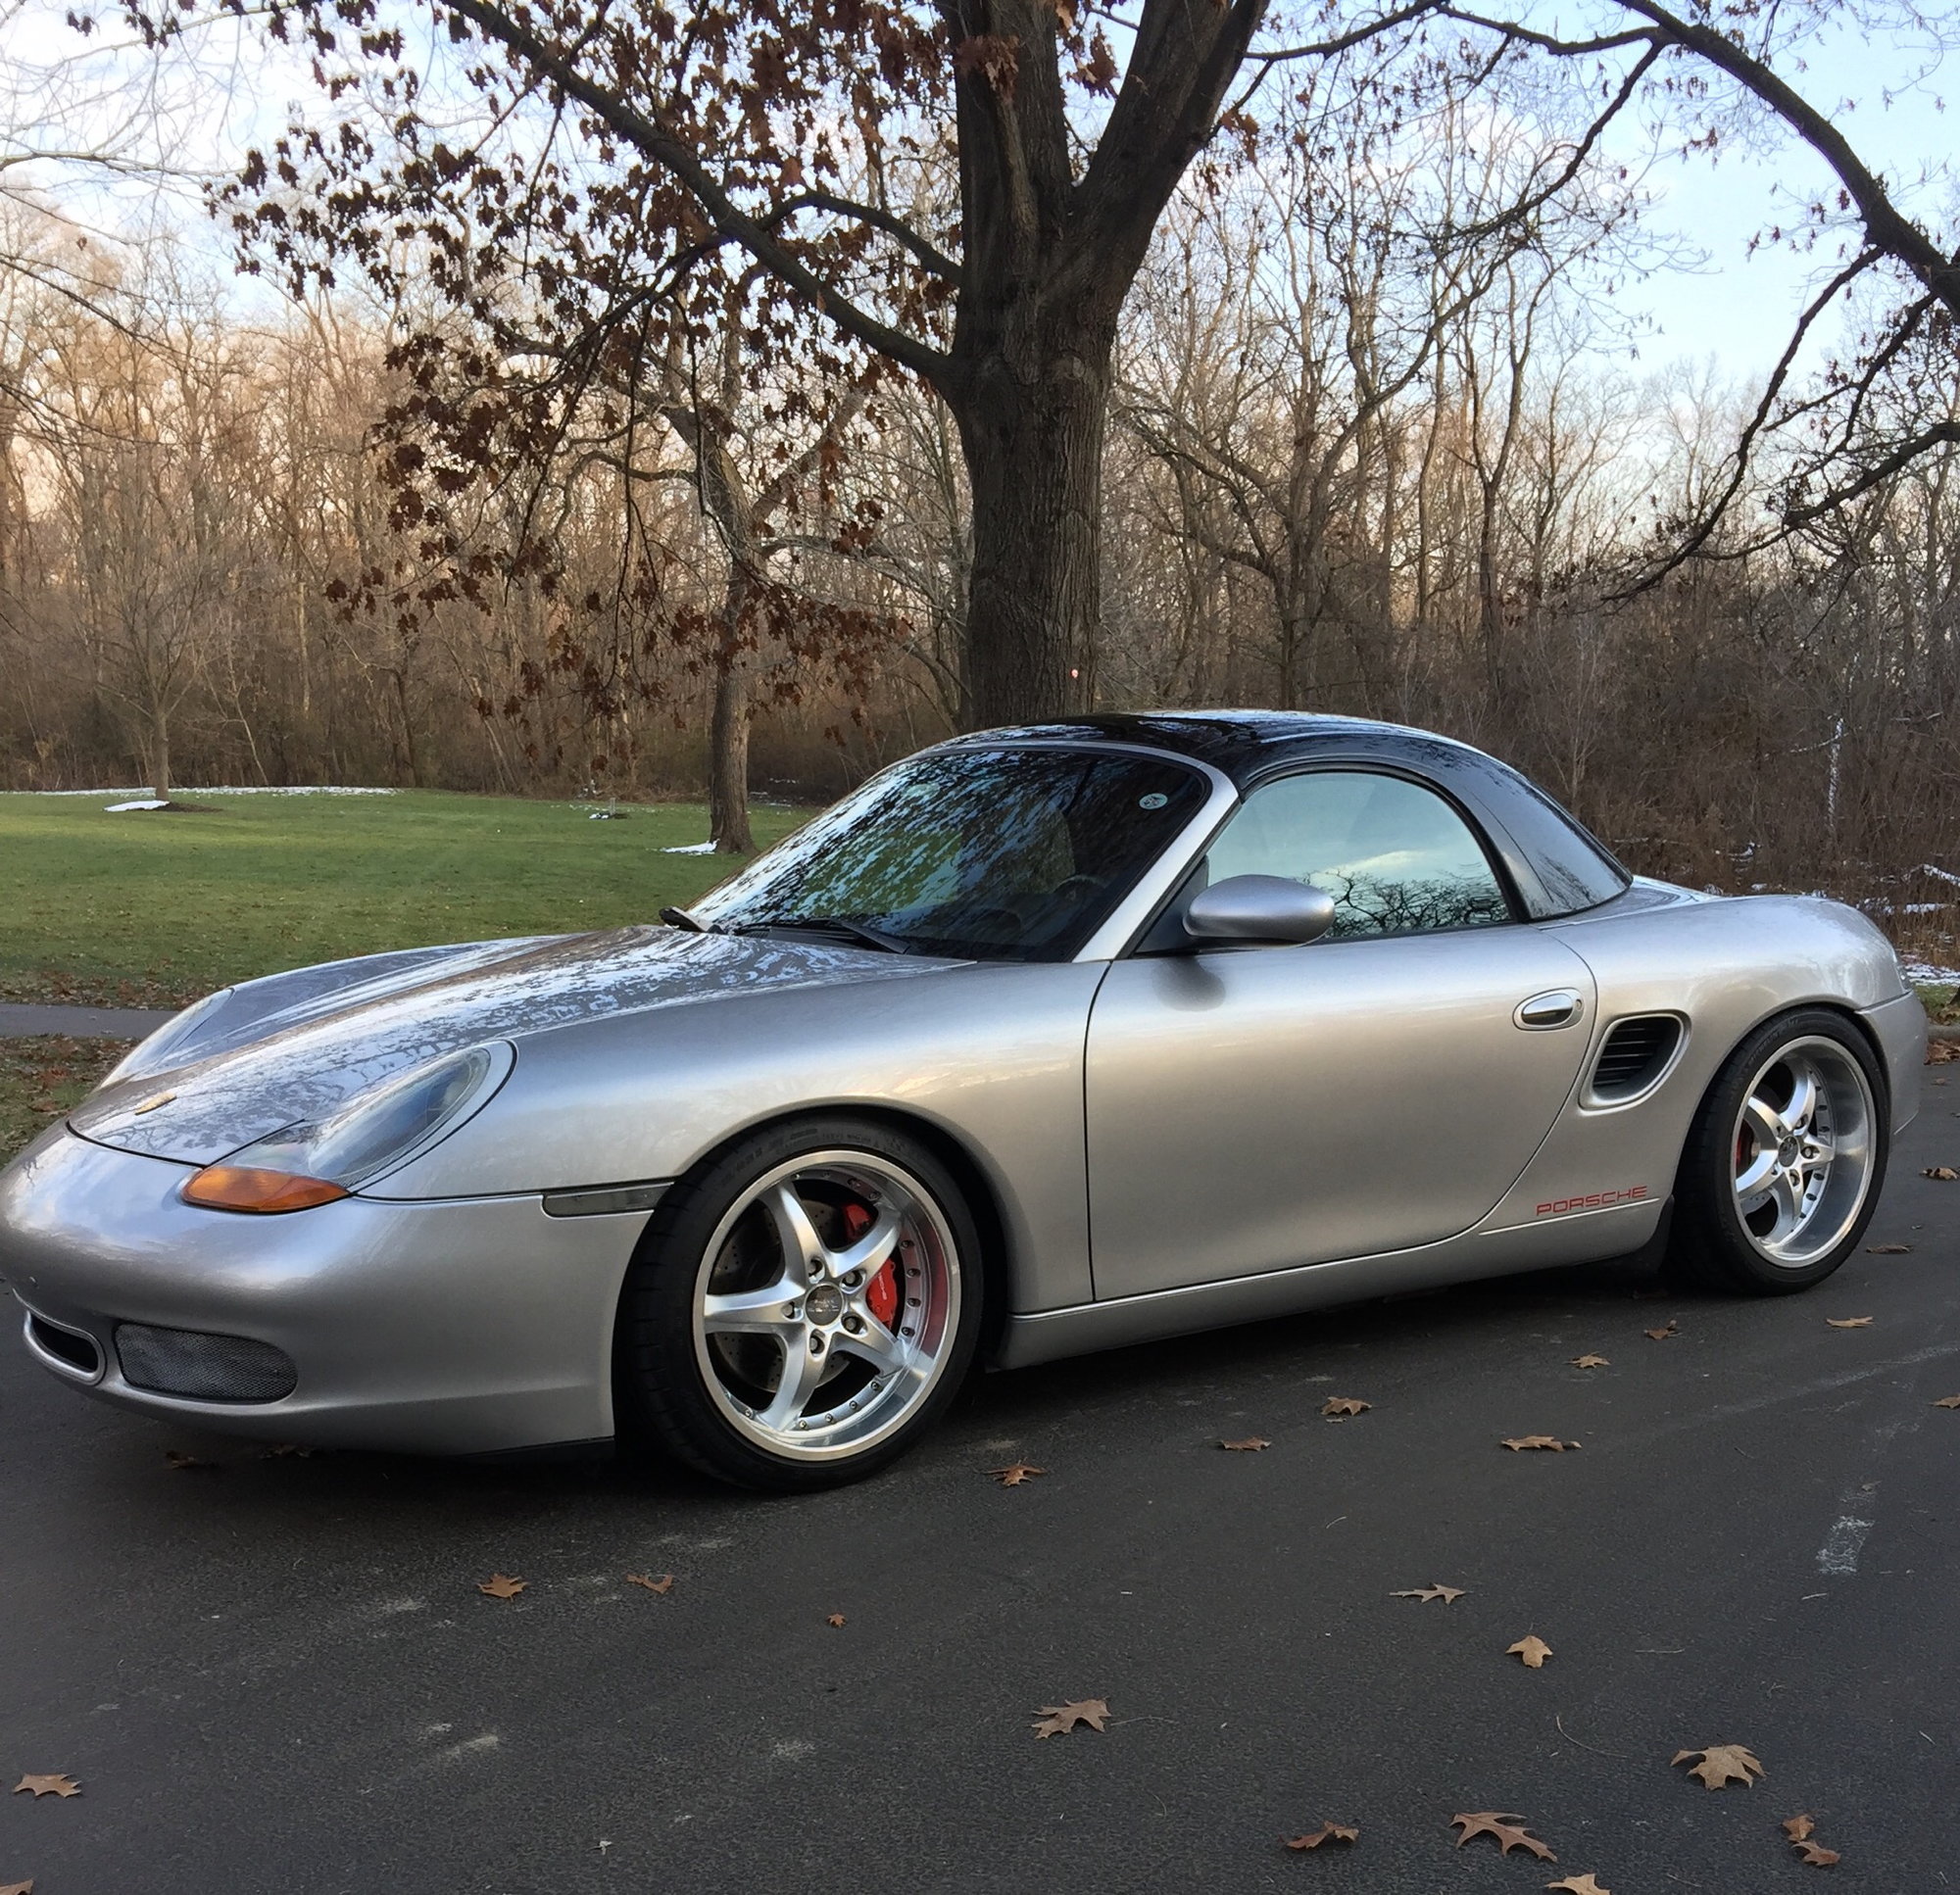 1999 Porsche Boxster - Ultimate sleeper (300hp Boxster 986) - Used - VIN WP0CA298XXU624163 - 79,400 Miles - 6 cyl - 2WD - Manual - Convertible - Silver - Naperville, IL 60564, United States